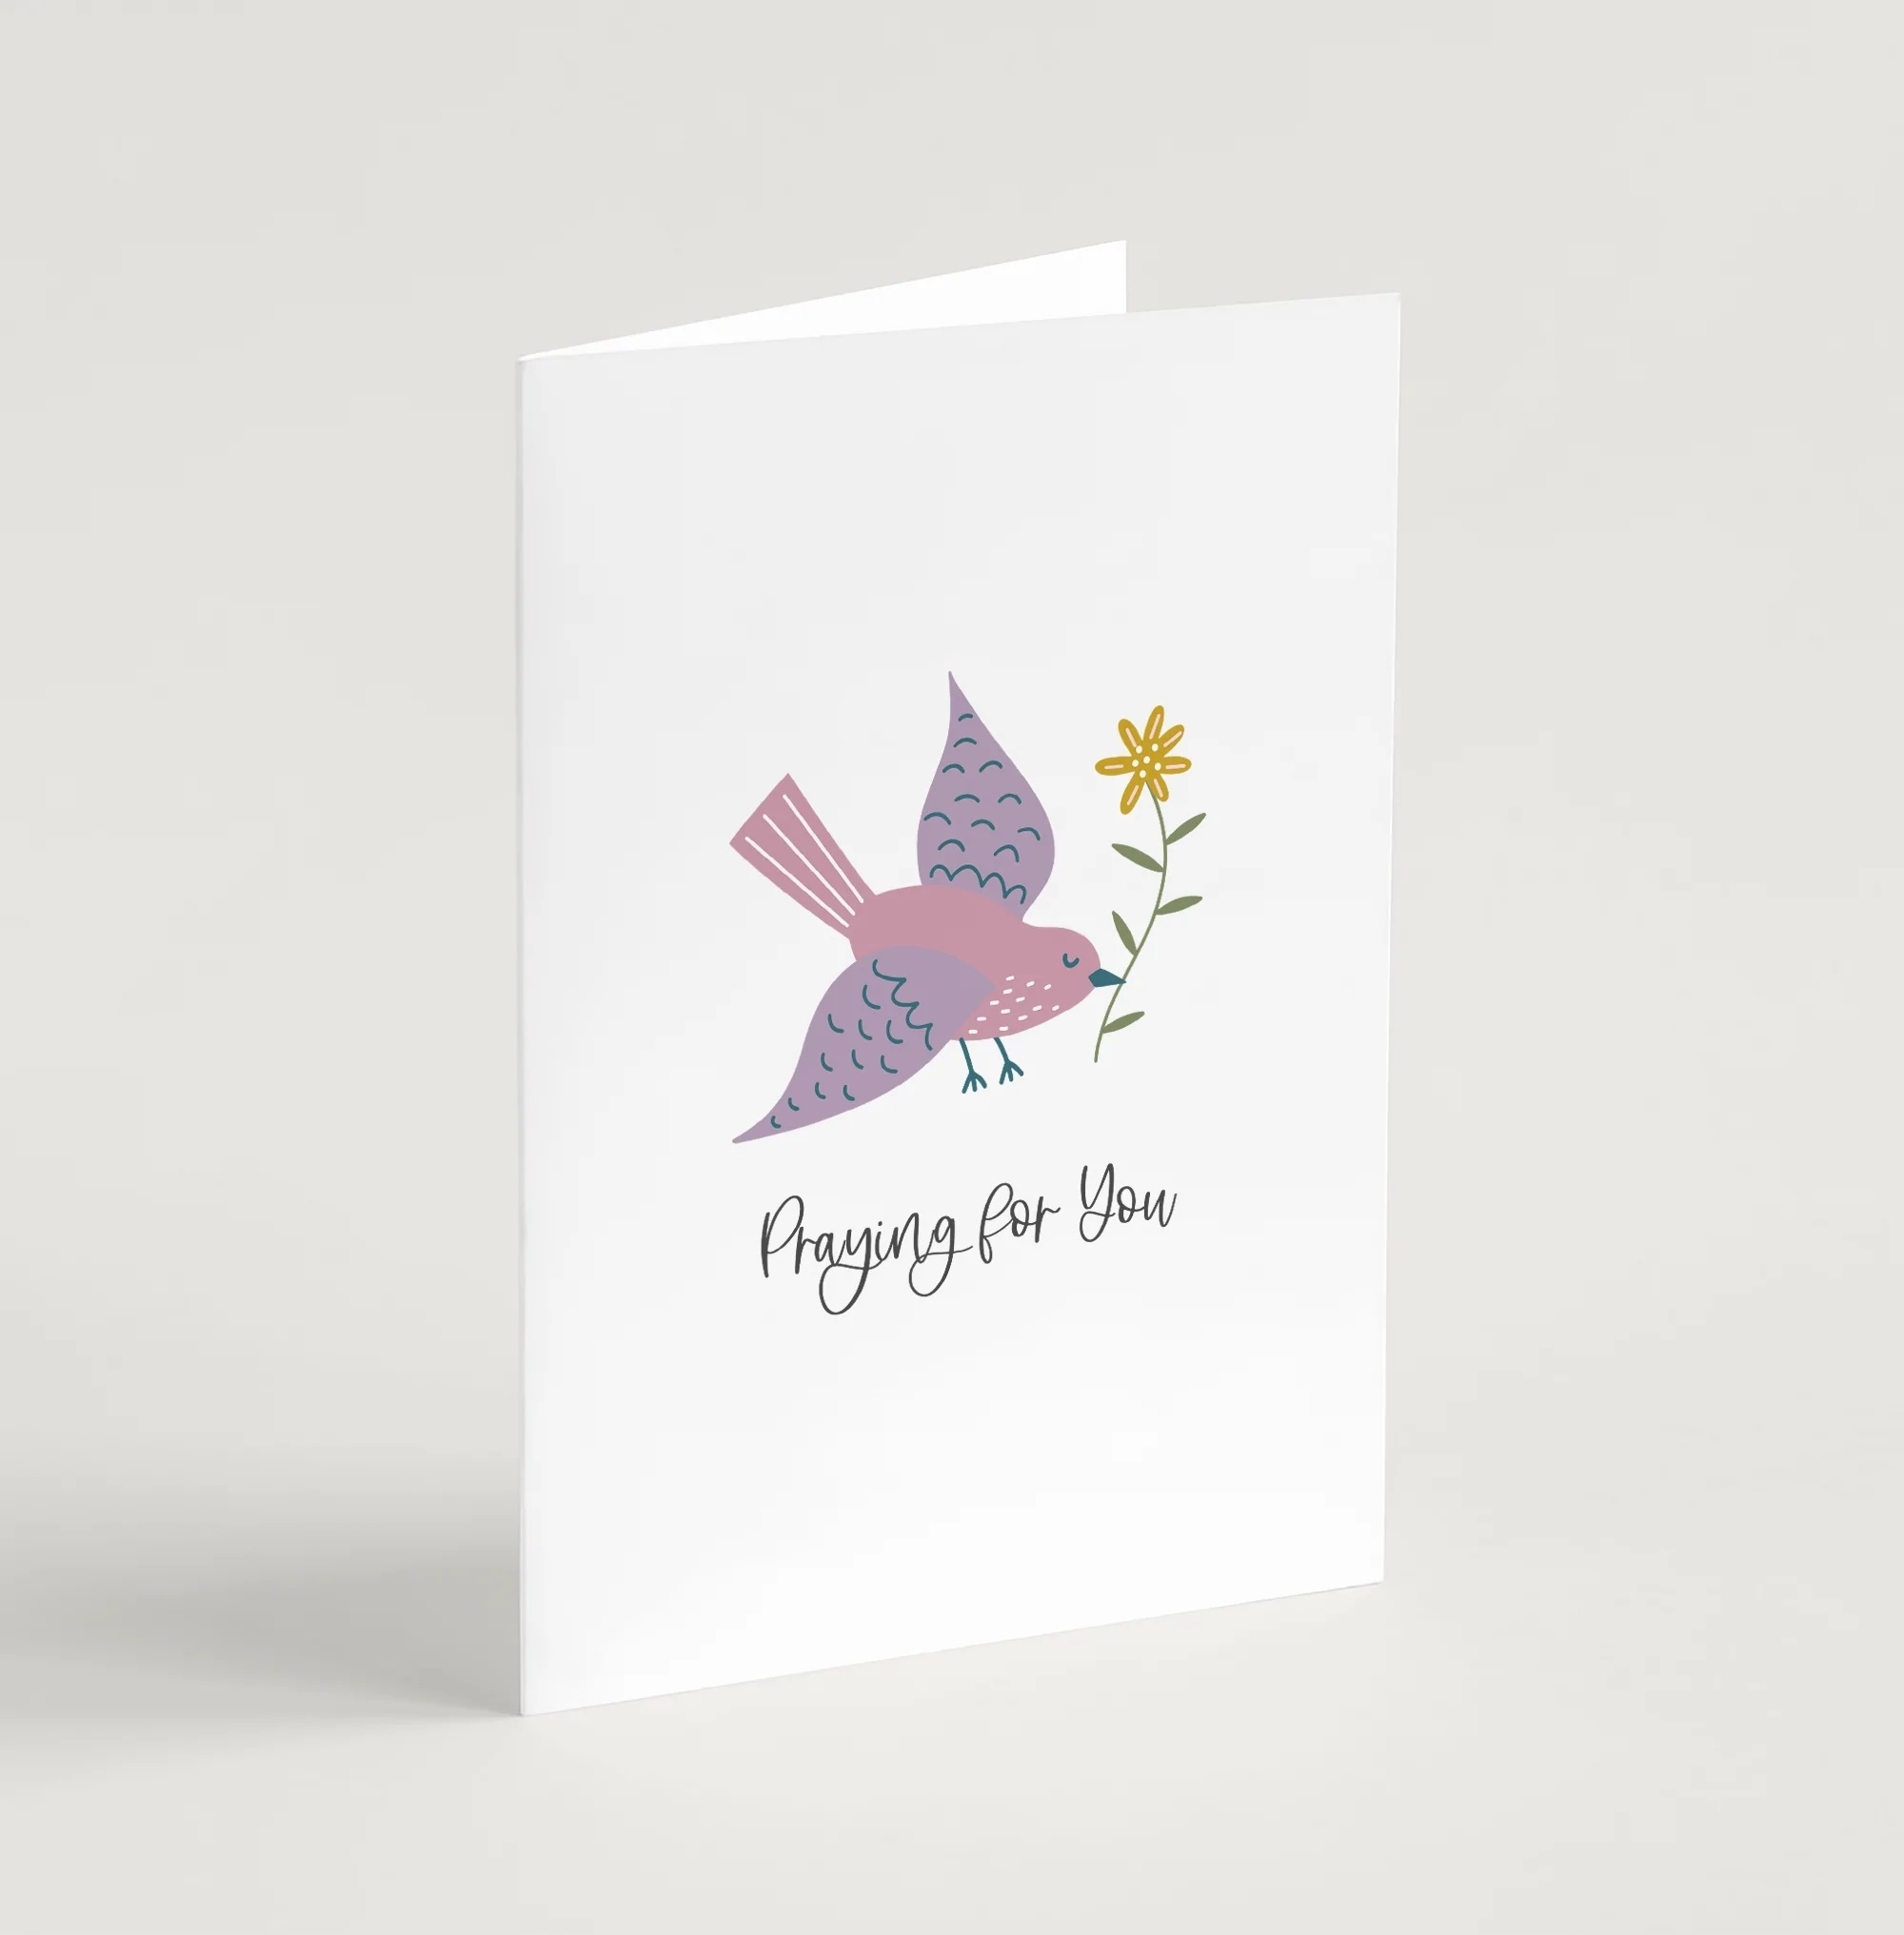 'Praying for You' (Birds of Joy) with bible verse A6 Greeting Card